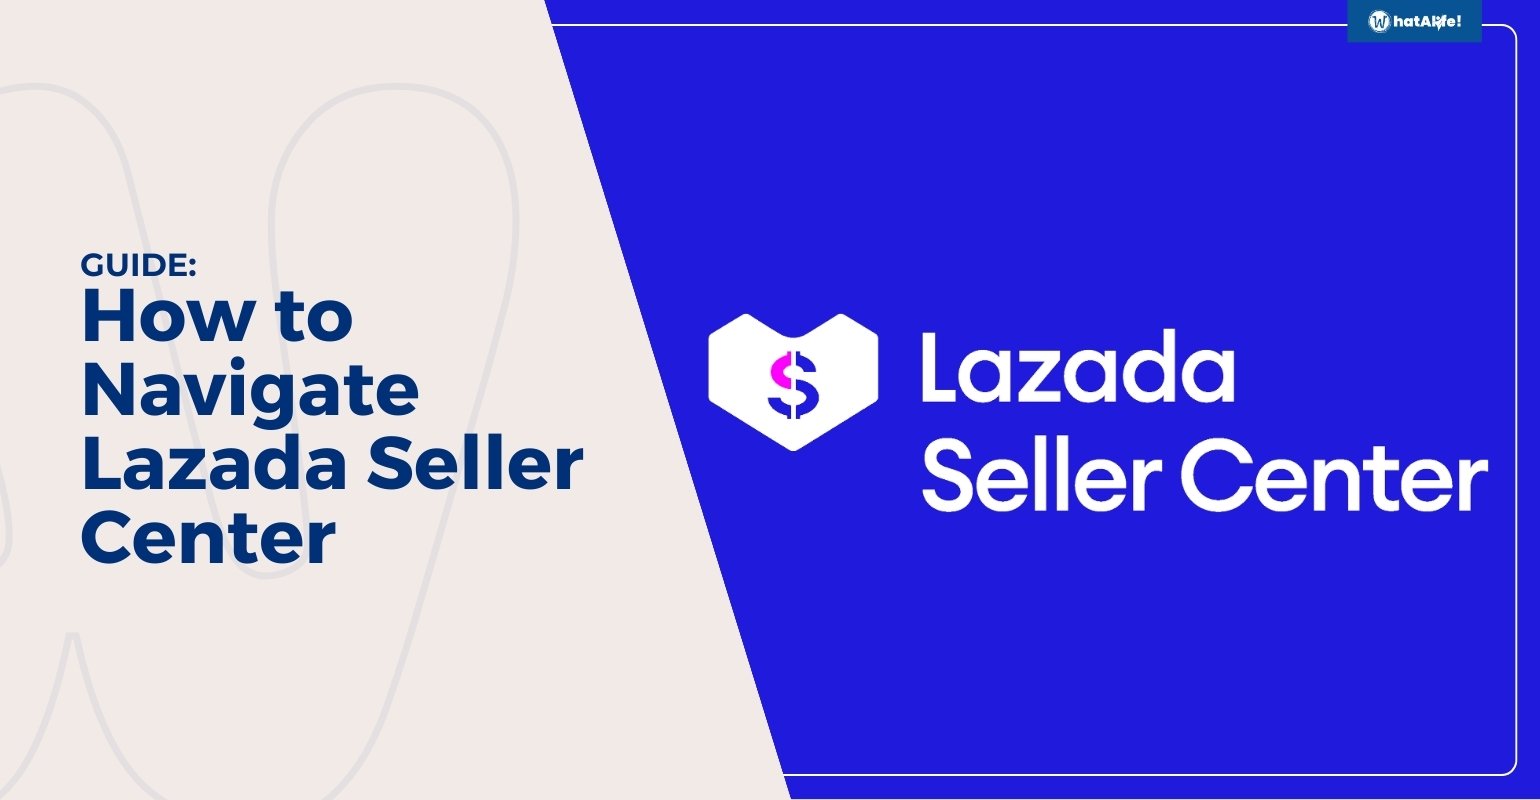 GUIDE: How to Navigate Lazada Seller Center 